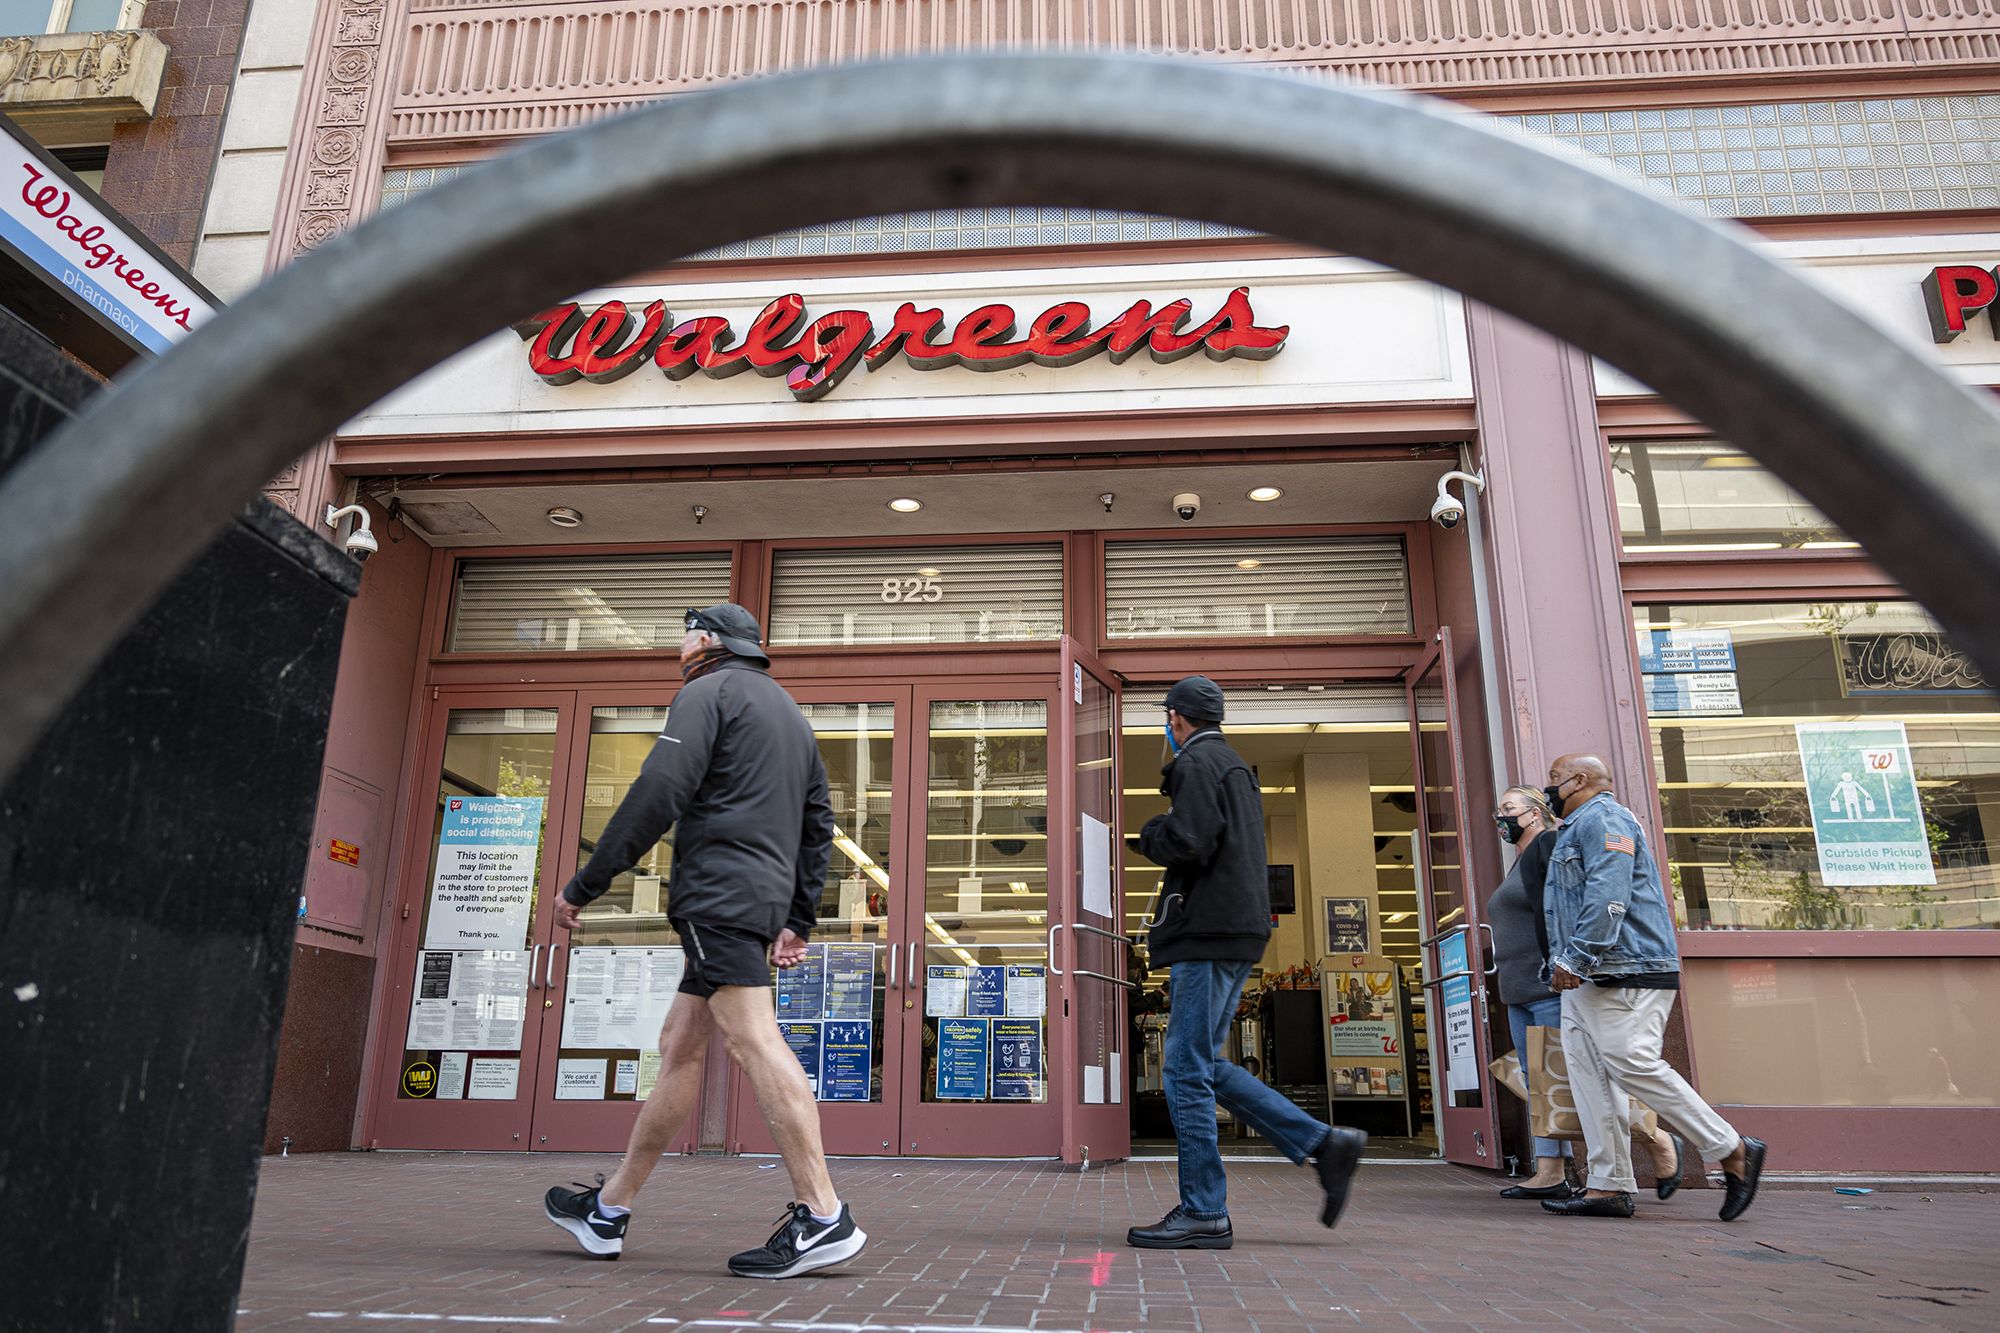 Walgreens replaced some fridge doors with screens. And some shoppers absolutely hate it | CNN Business